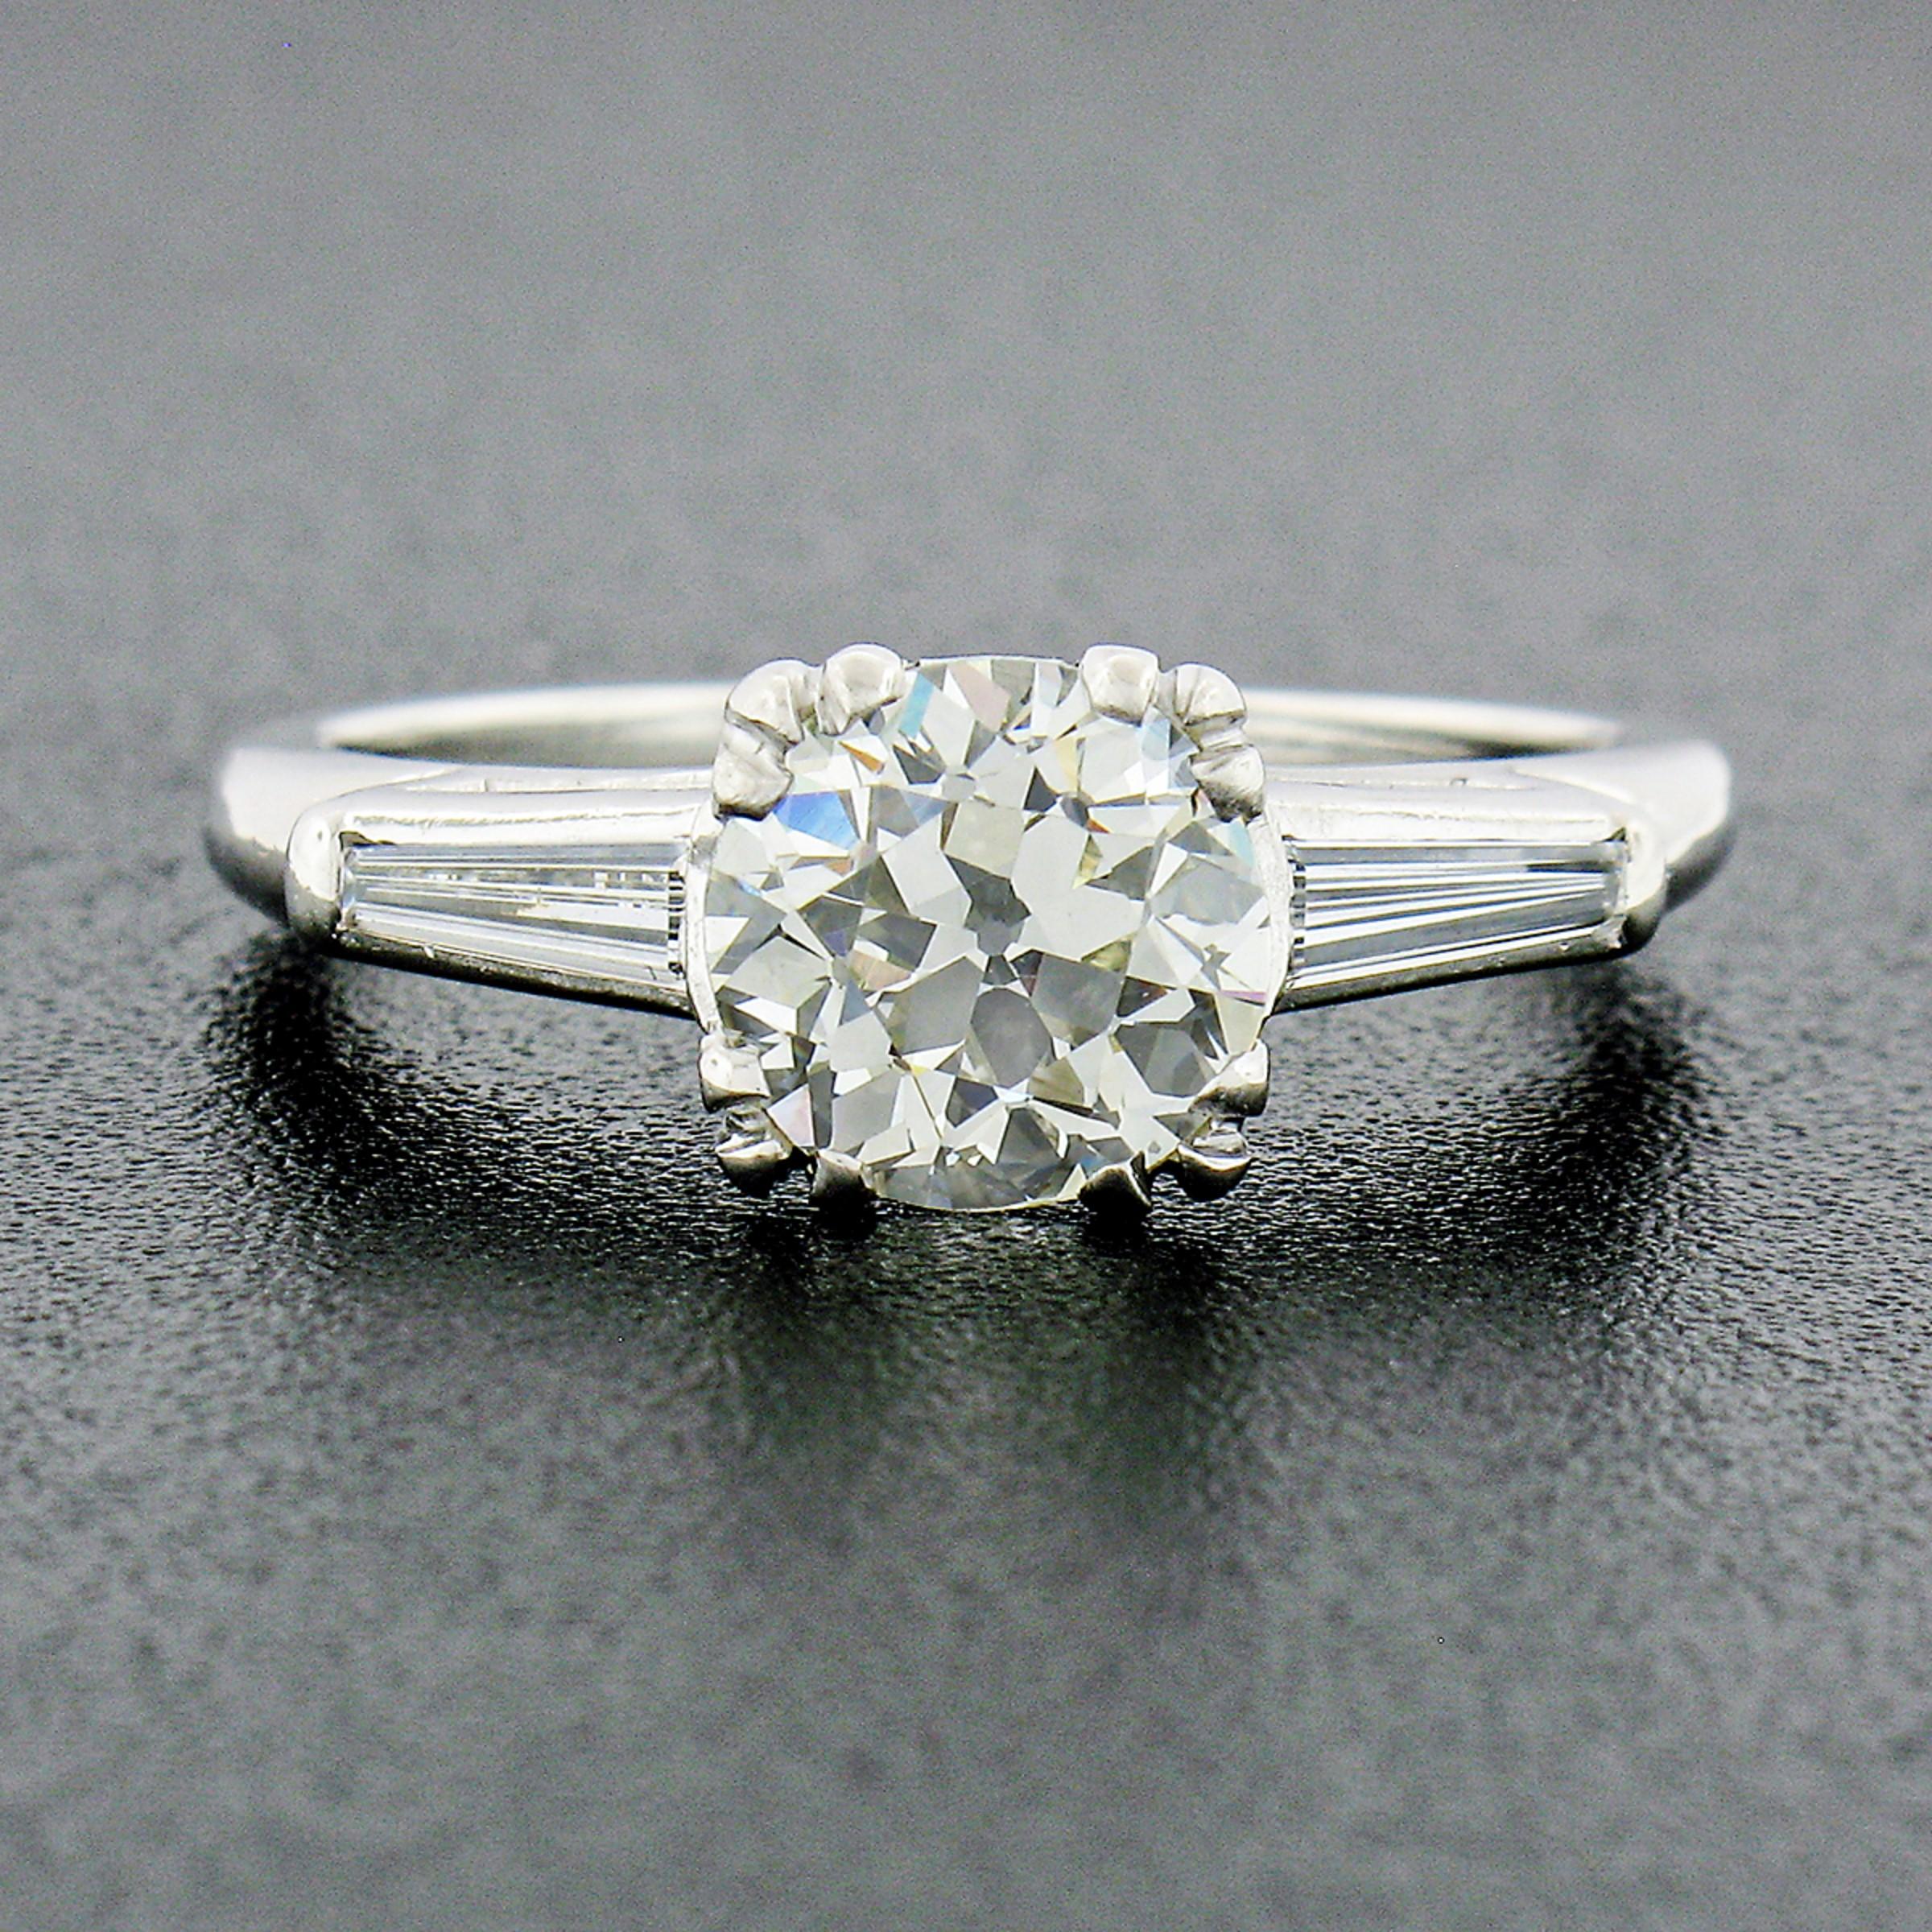 This breathtaking vintage diamond engagement ring was crafted from solid platinum and features a gorgeous, old European cut, diamond solitaire at its center. The diamond is GIA certified, weighing exactly 1.40 carats, showing a nice large size and